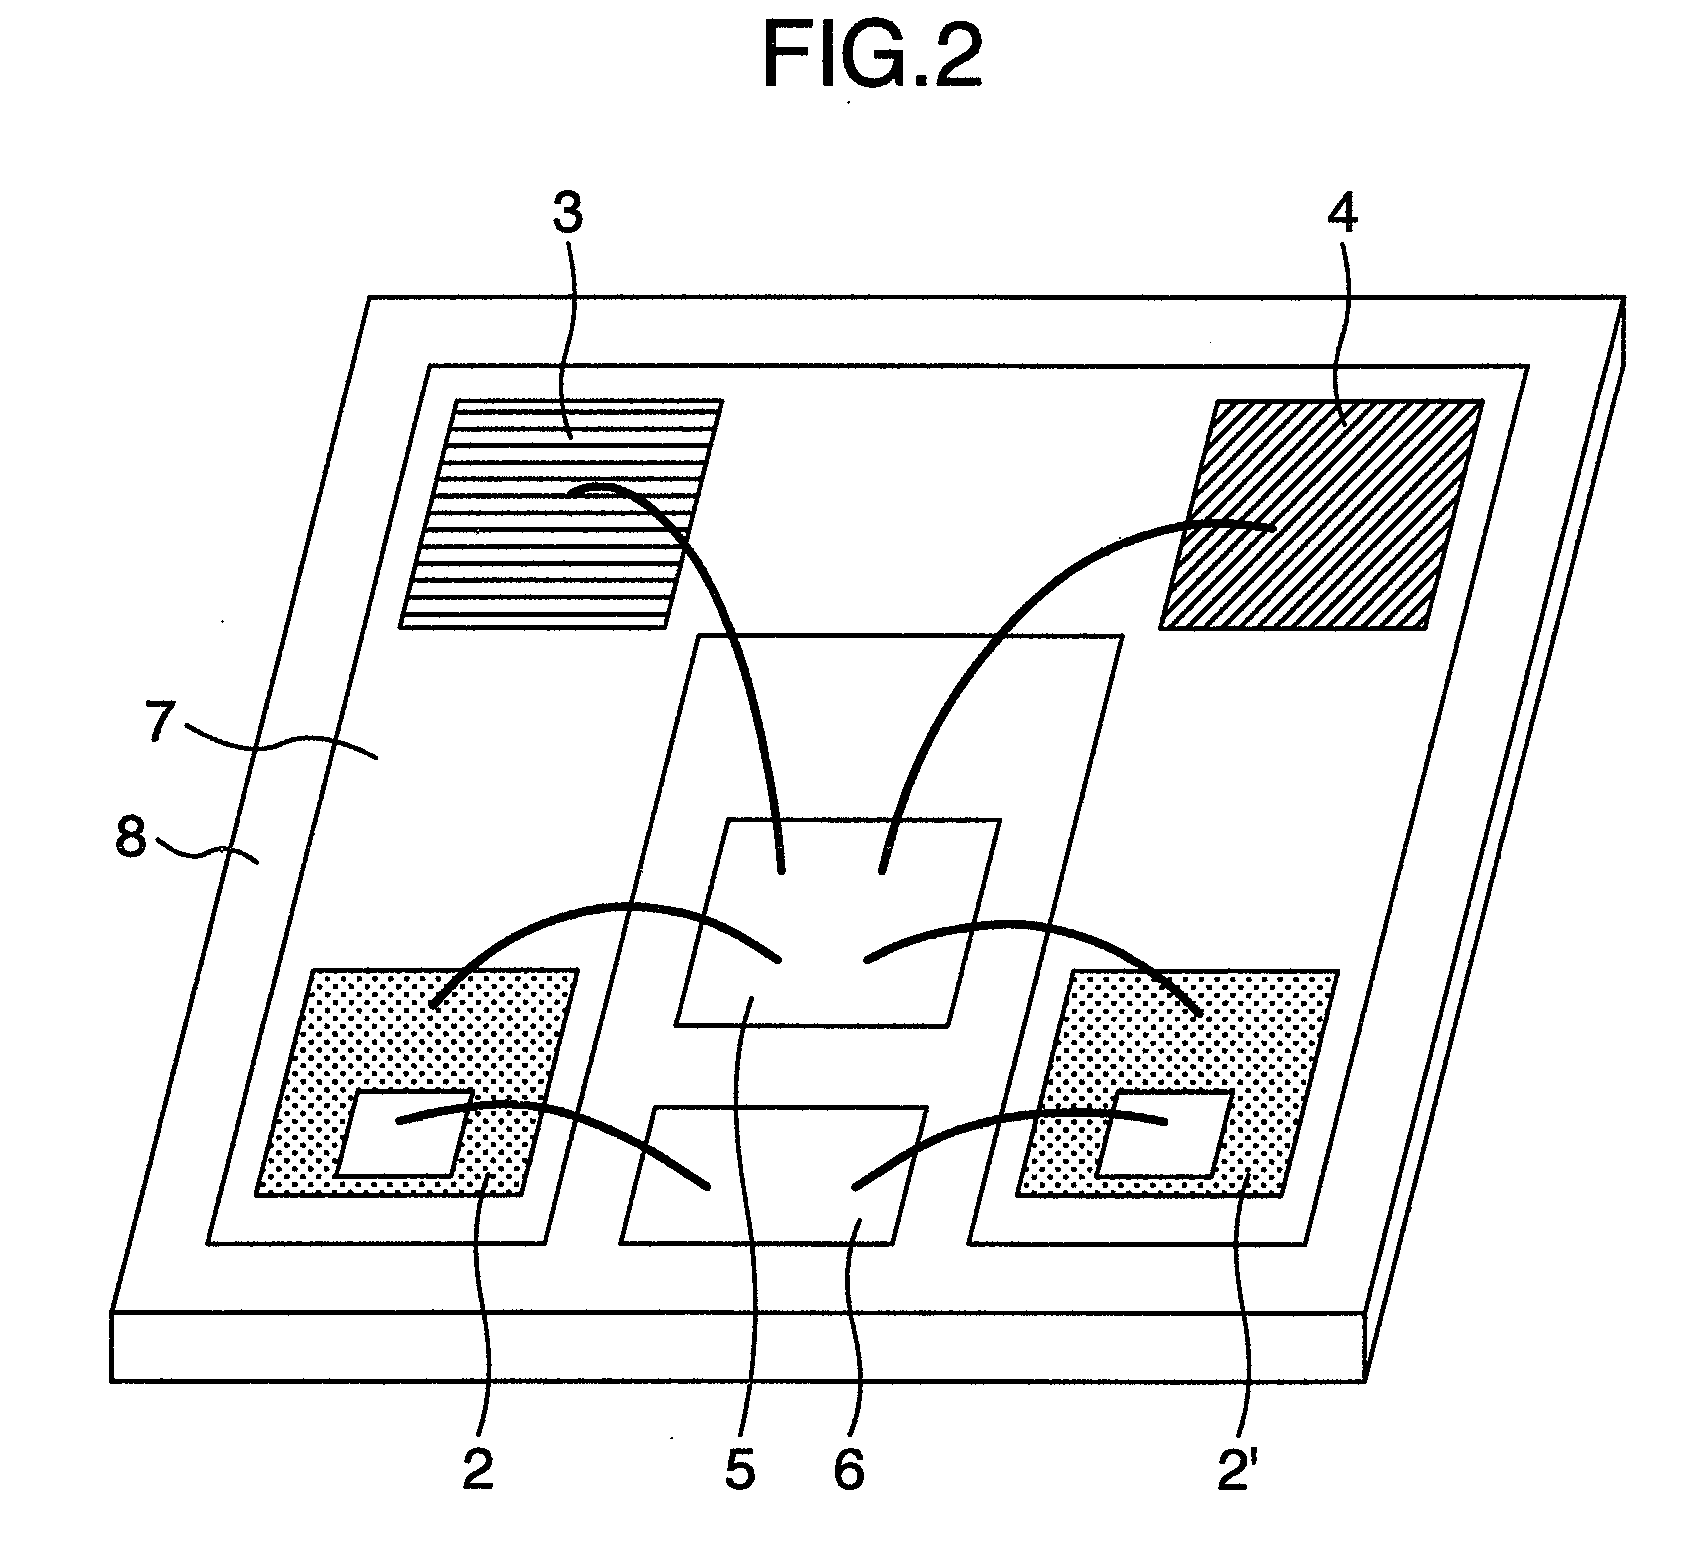 Circuit device having a free wheeling diode, circuit device and power converter using diodes